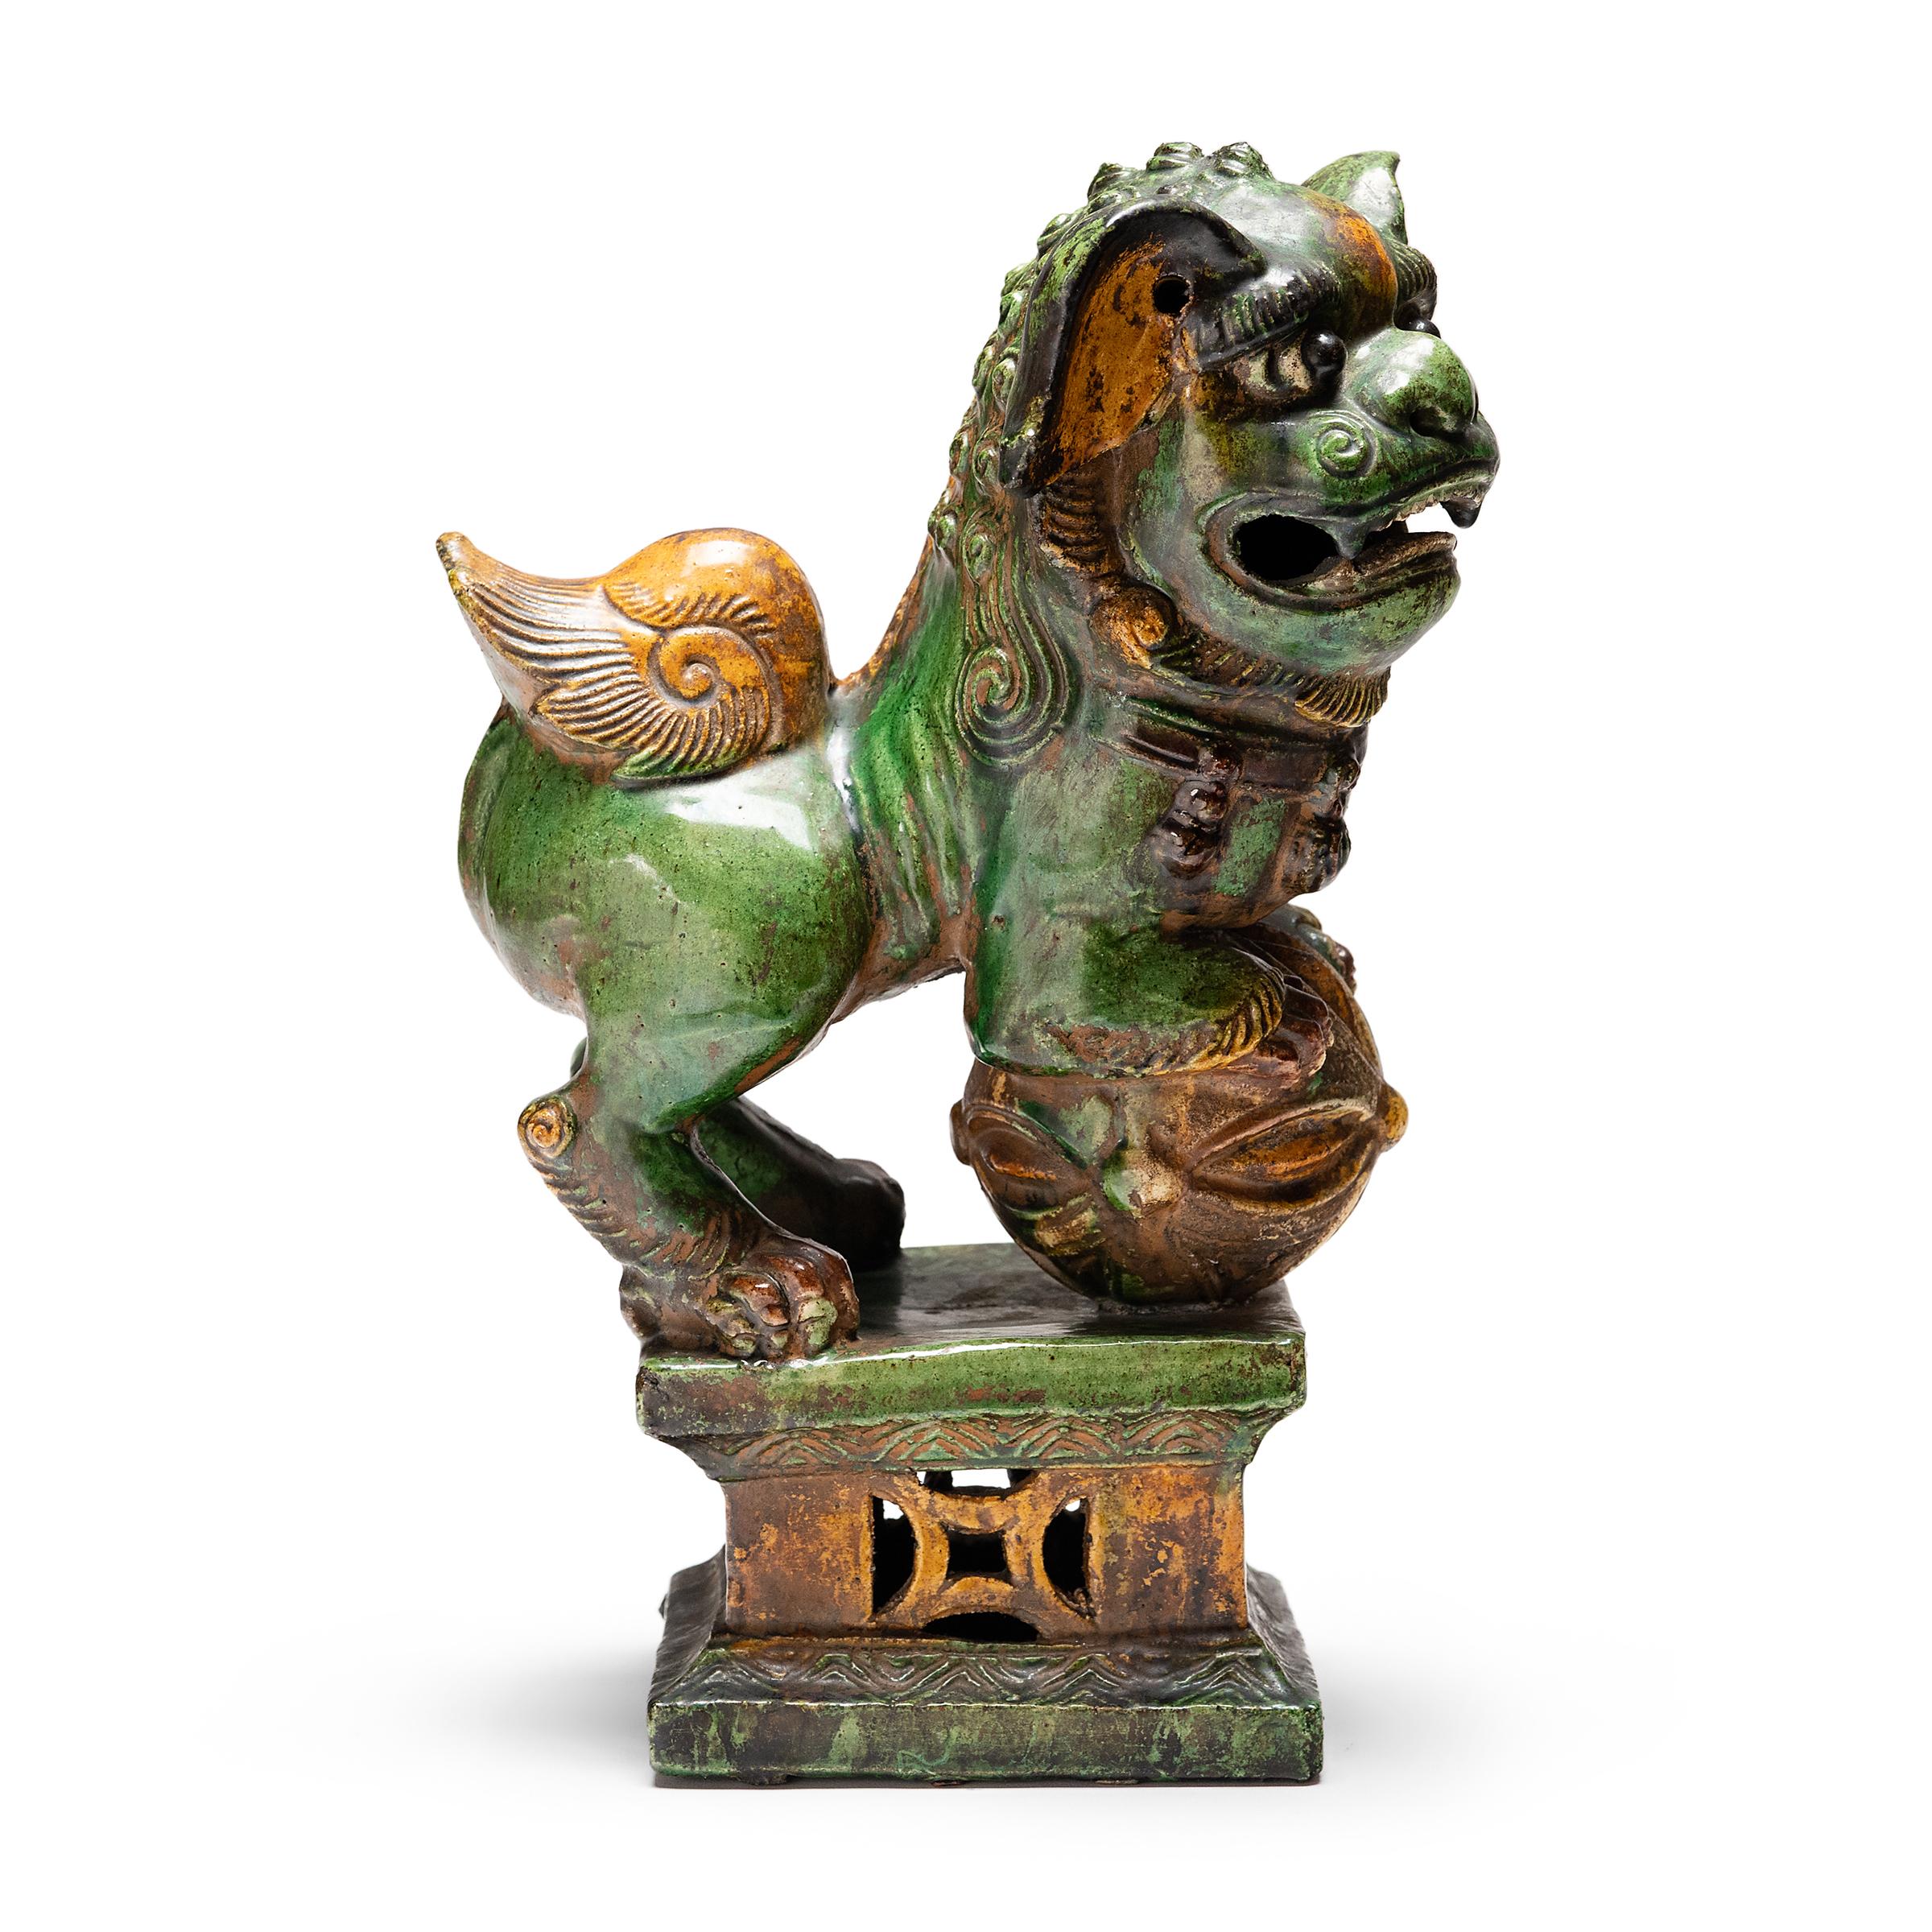 Believed to be powerful protectors against malevolent spirits, fu lion dogs have stood guard at the entryways and thresholds of Chinese homes for centuries. Also known shizi, the mythical pair represents yin and yang, the balance of male and female